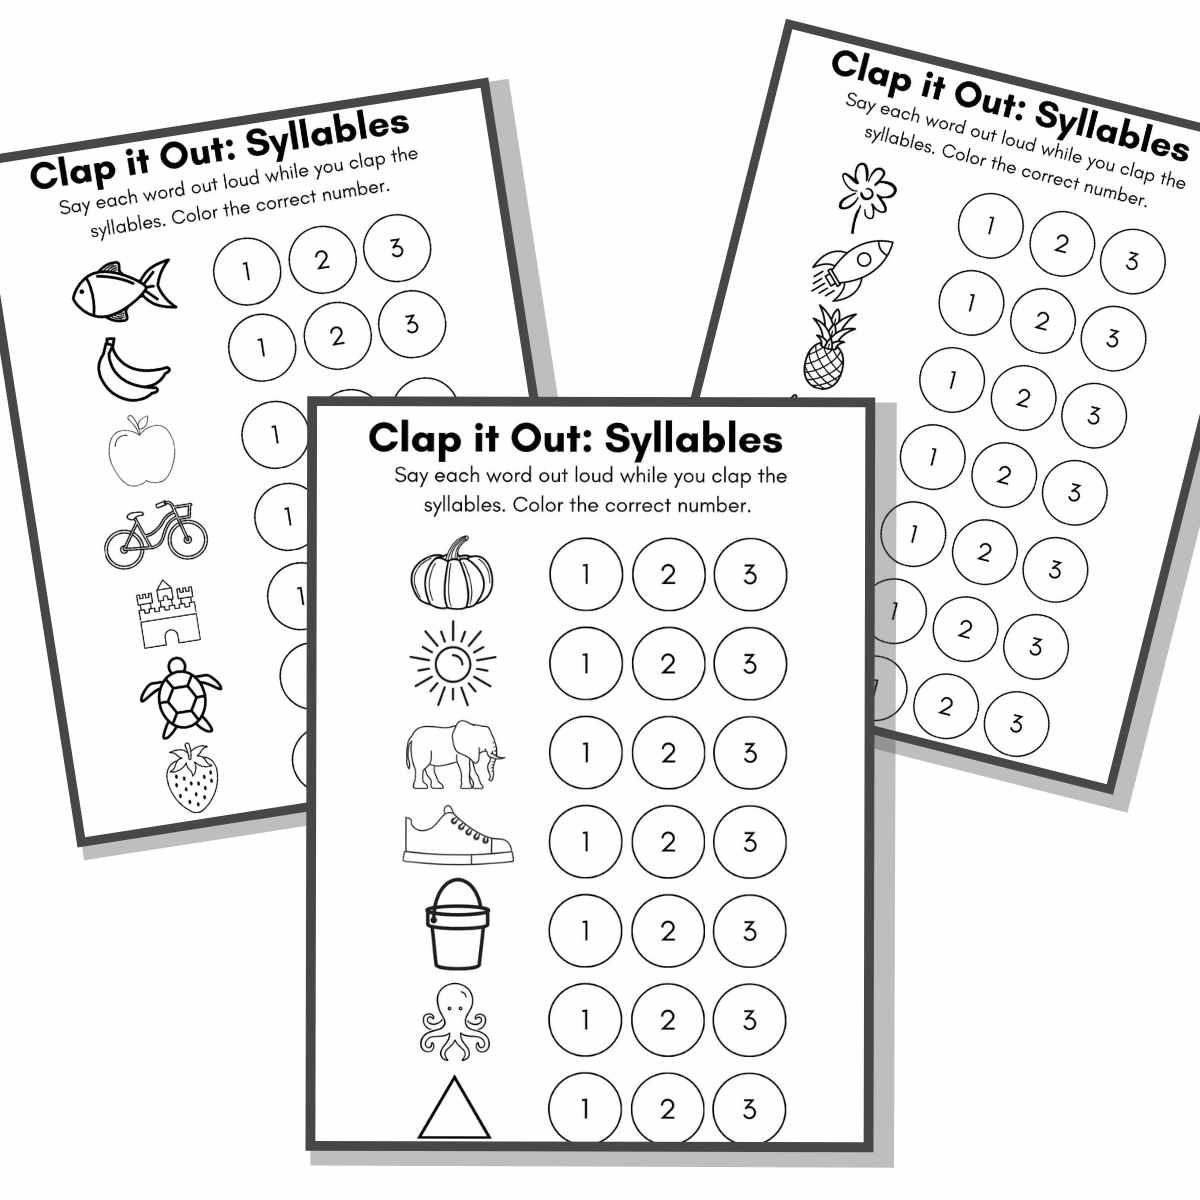 Three pages of the printable clap counting syllables worksheets.